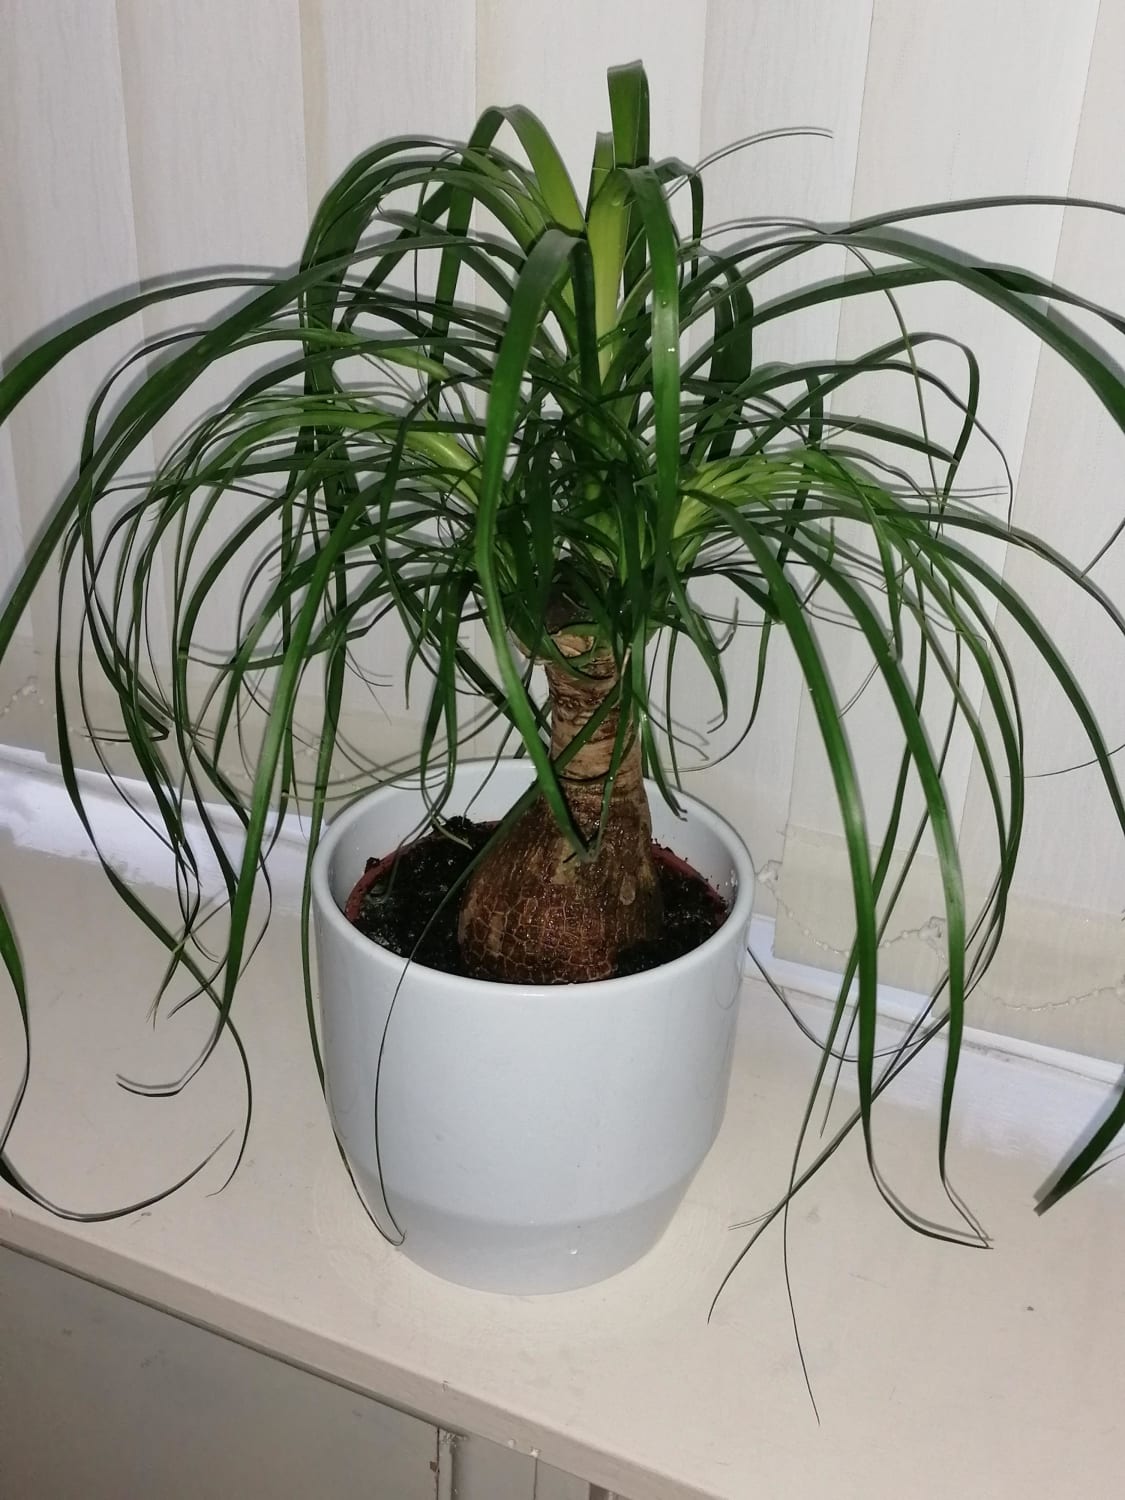 Just wanted to share my favourite plant, my pony tail palm!